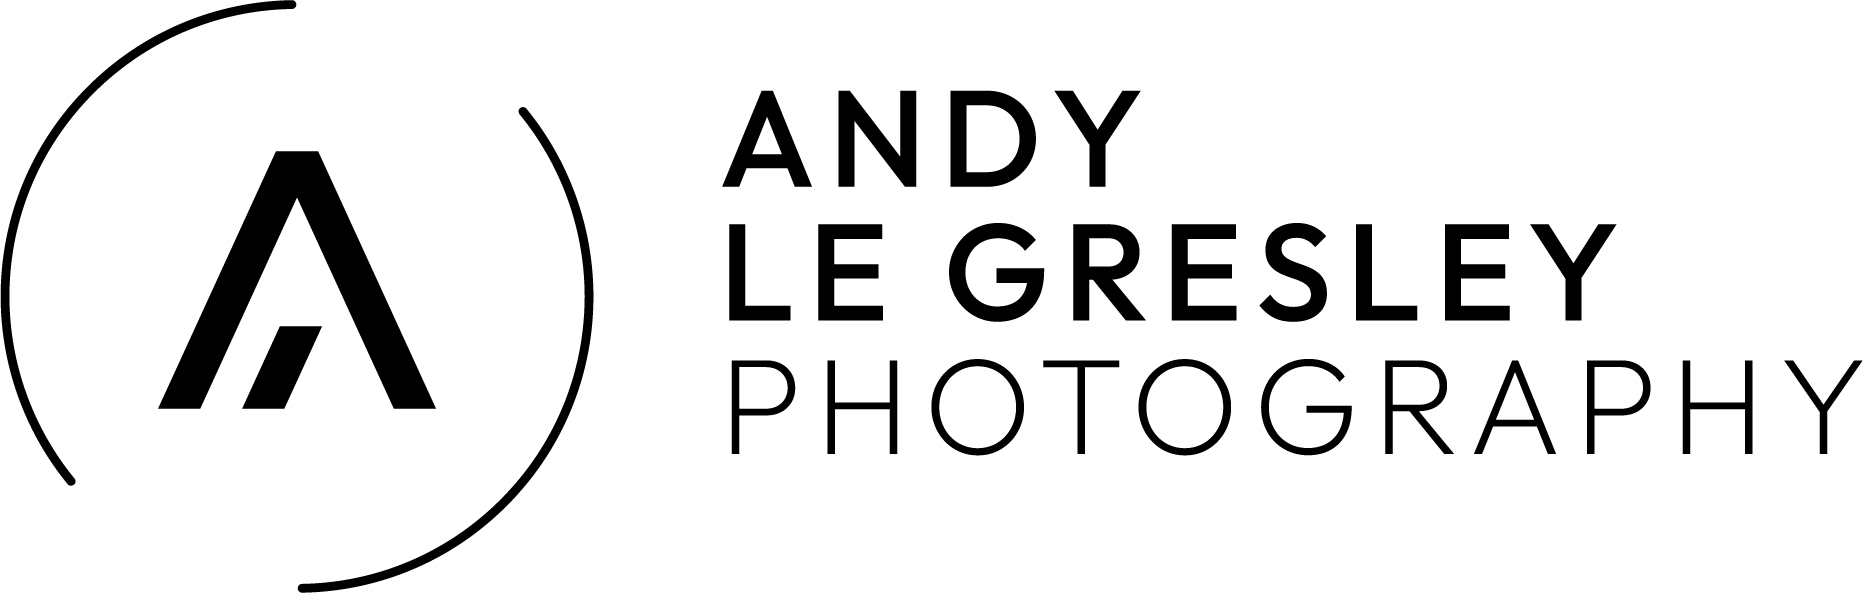 Andy Le Gresley Photography